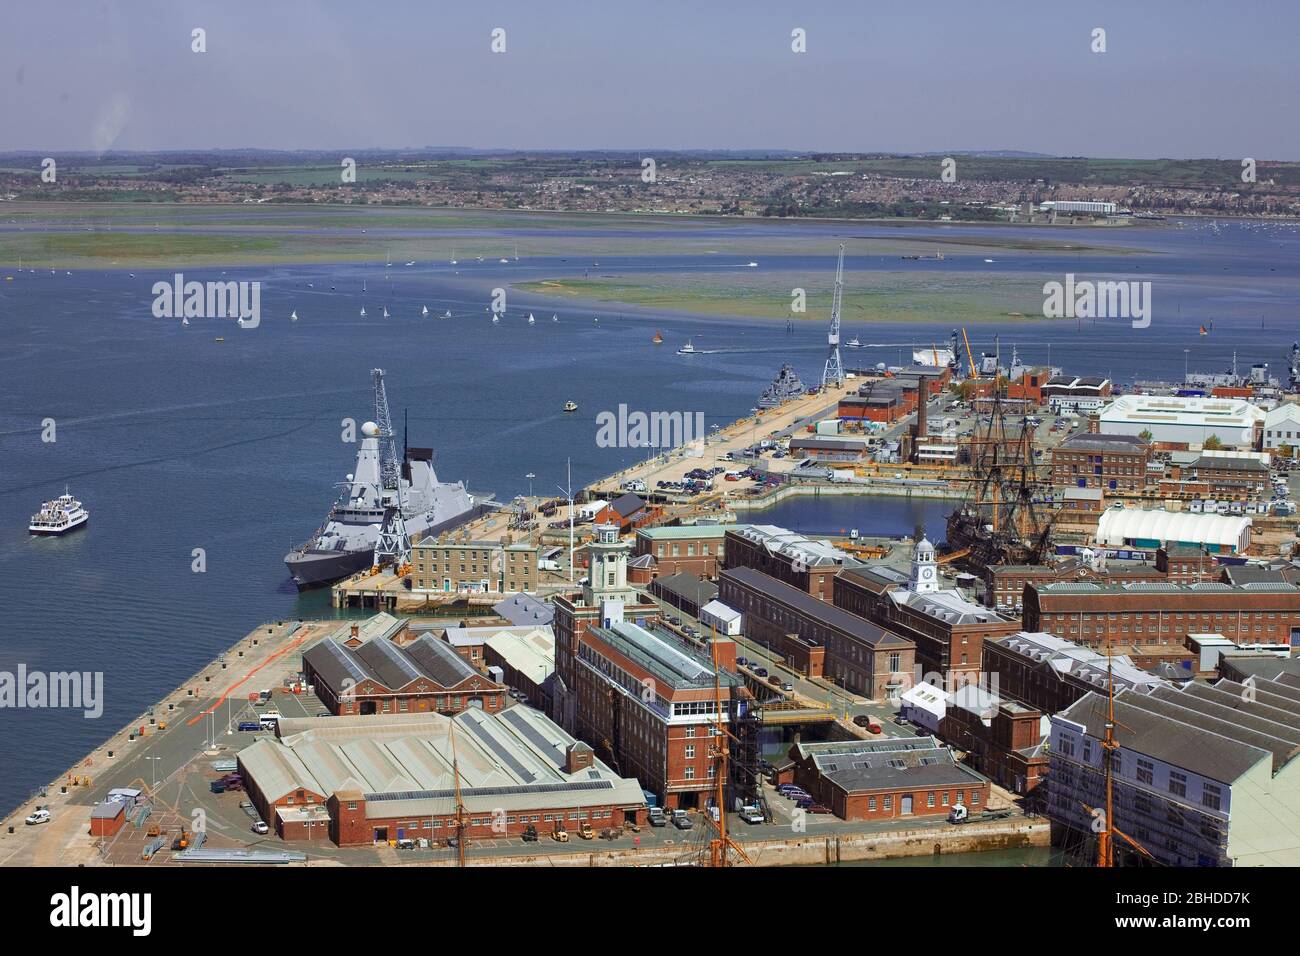 View of Portsmouth Harbour and H.M. Dockyard from the viewing platform, Spinnaker Tower, Gunwharf Quays, Portsmouth, Hampshire, England, UK Stock Photo